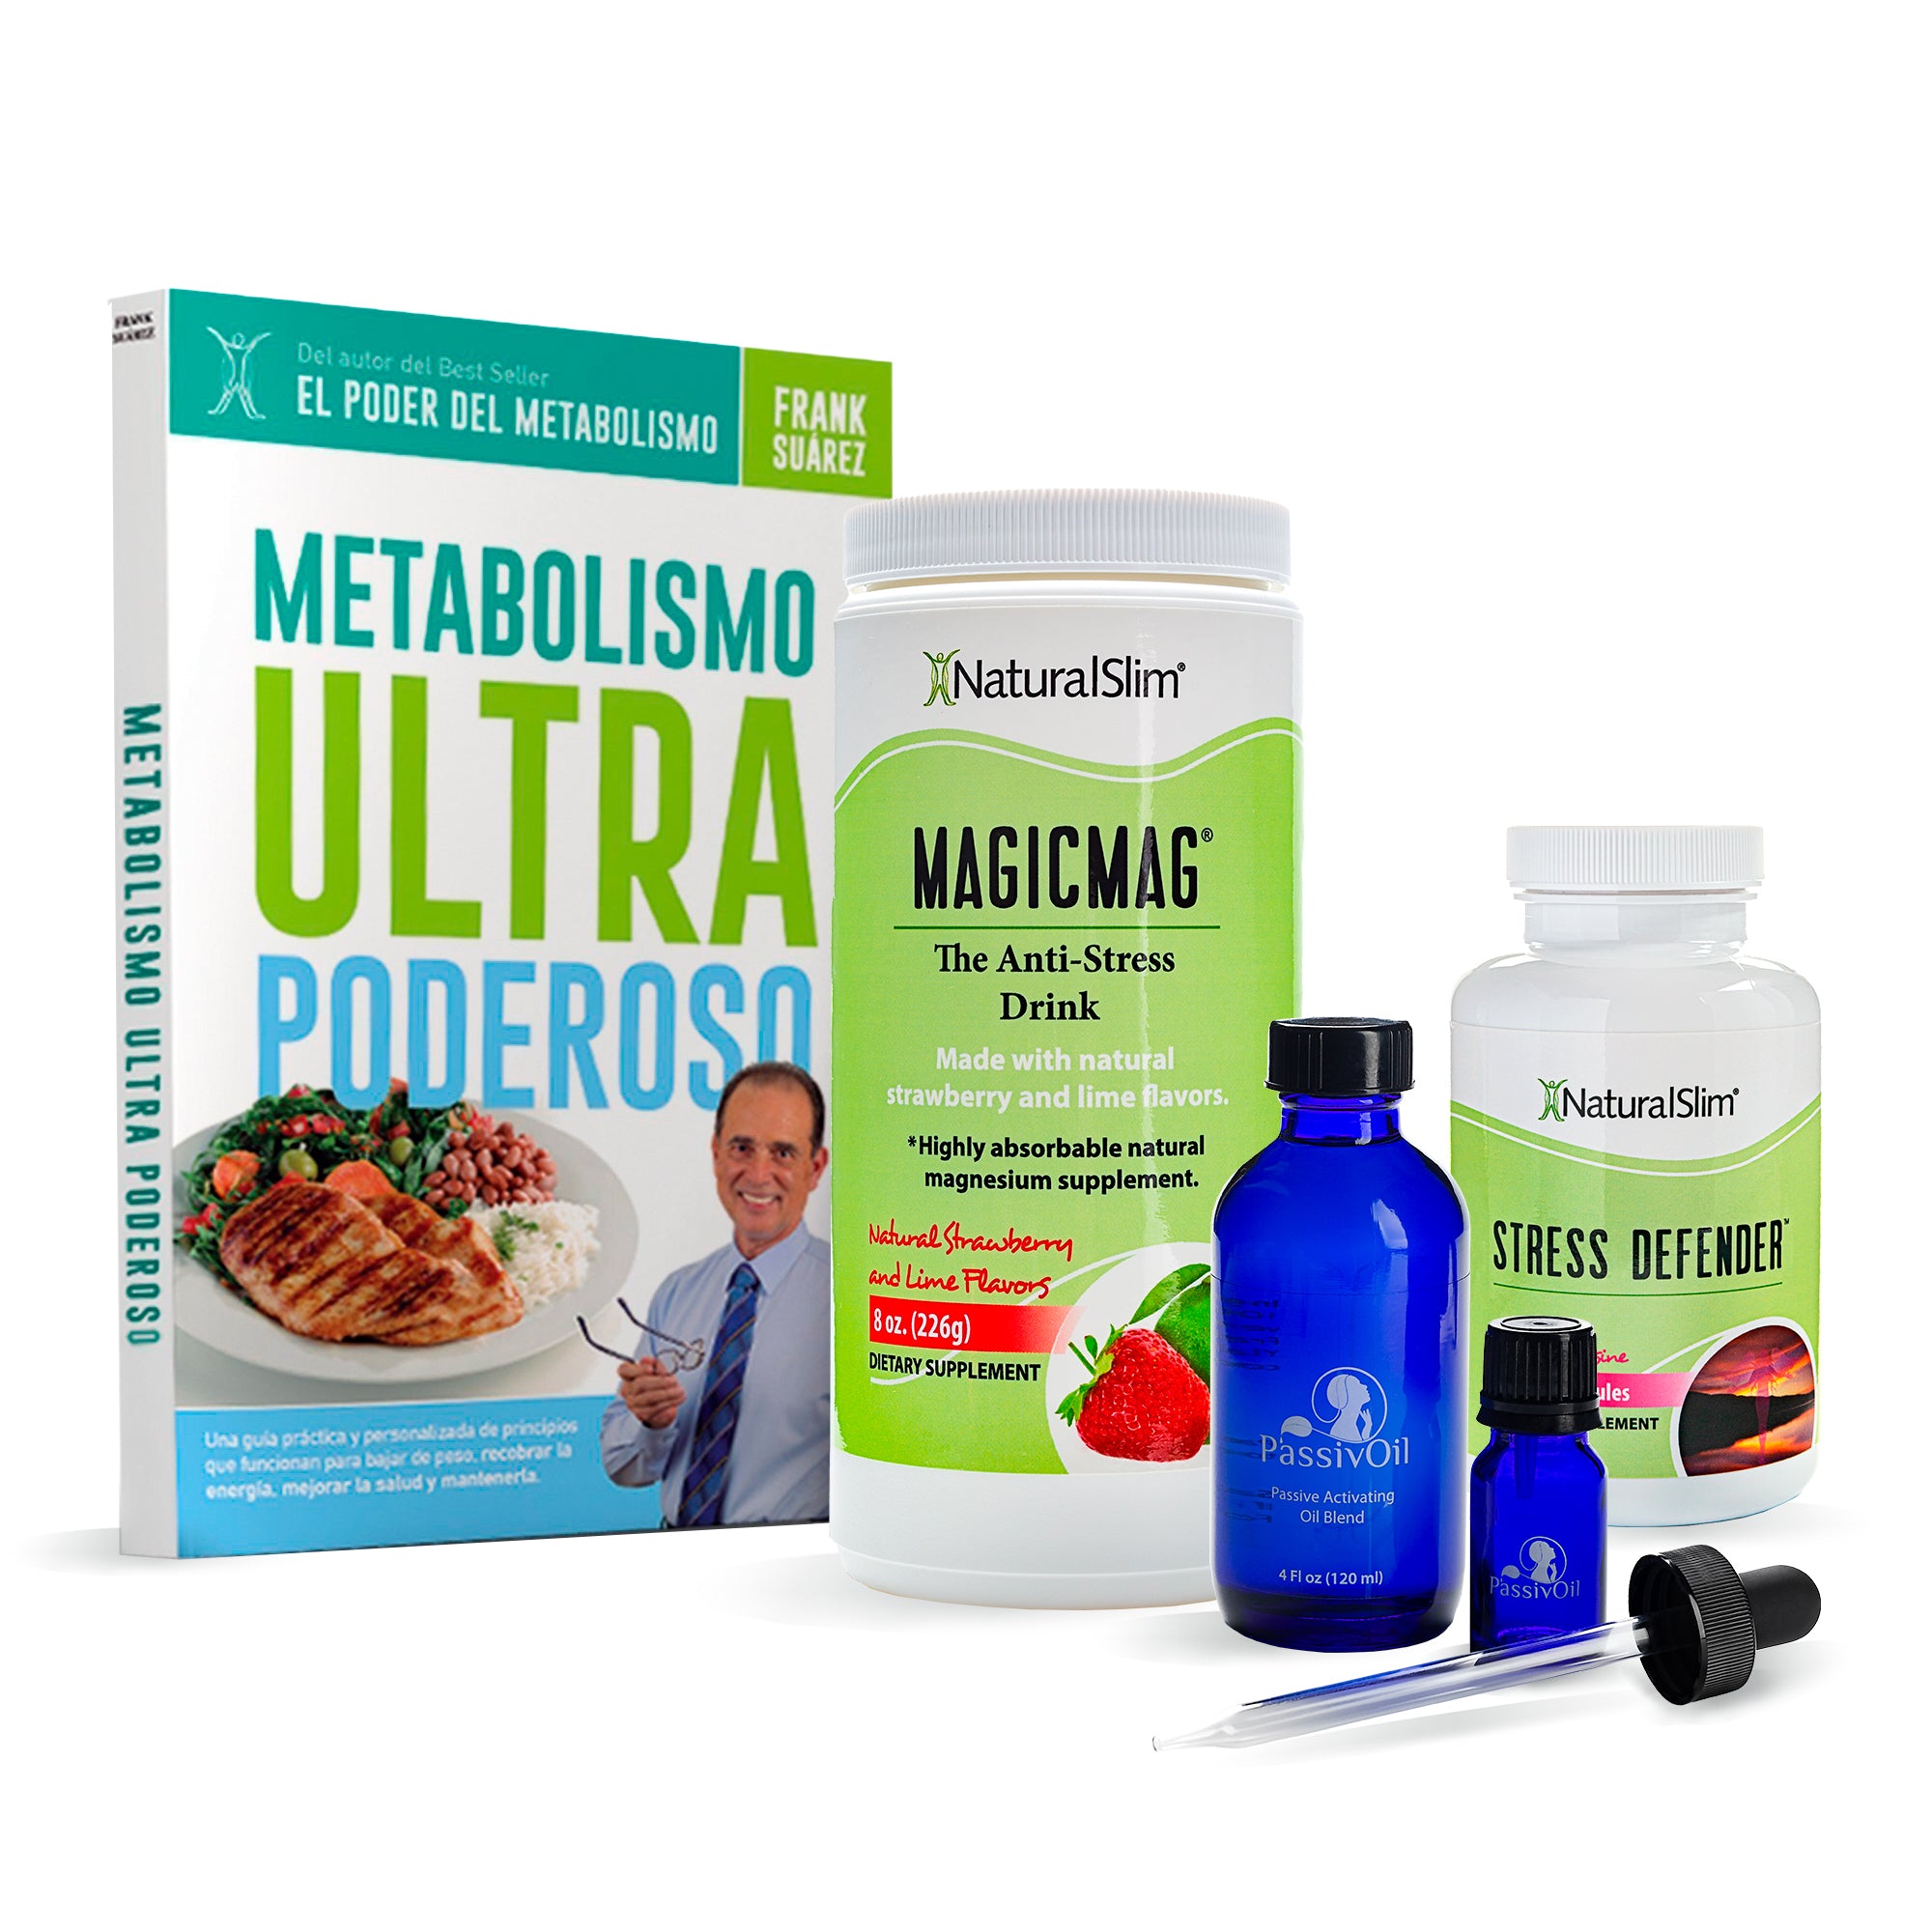  Naturalslim Personal Program Complete Wellness Kit Supplement  with FREE Frank Suarez Metabolismo Books (Spanish Edition) & Weekly  Consultation - Ultimate Guide to Healthy Metabolism: Health & Household